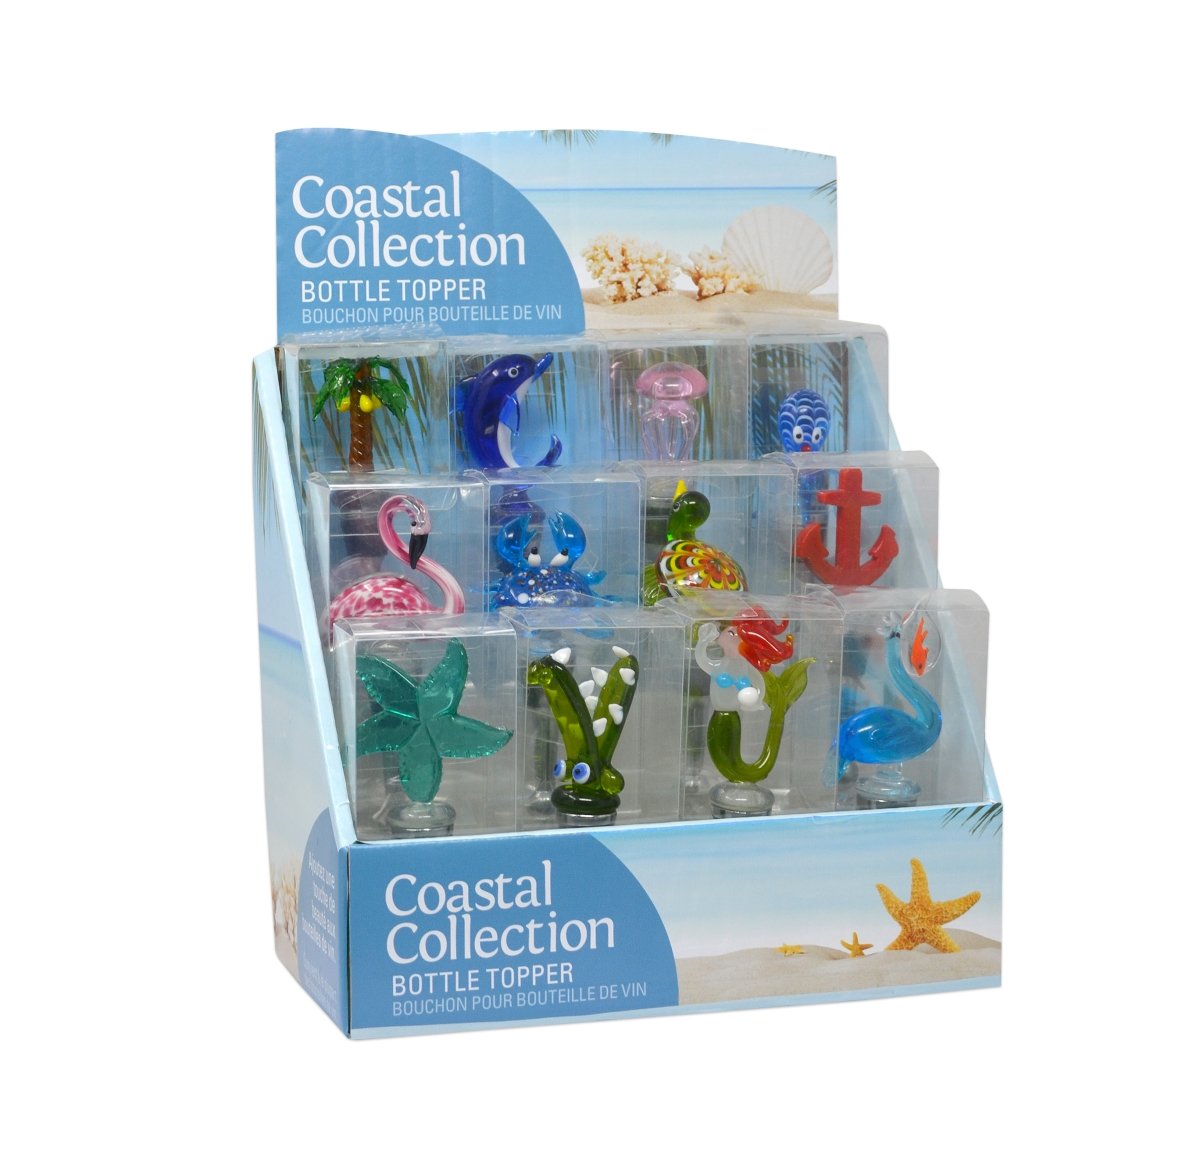 Bs-1010 Coastal Collection Bottle Stopper Display - 12 Piece